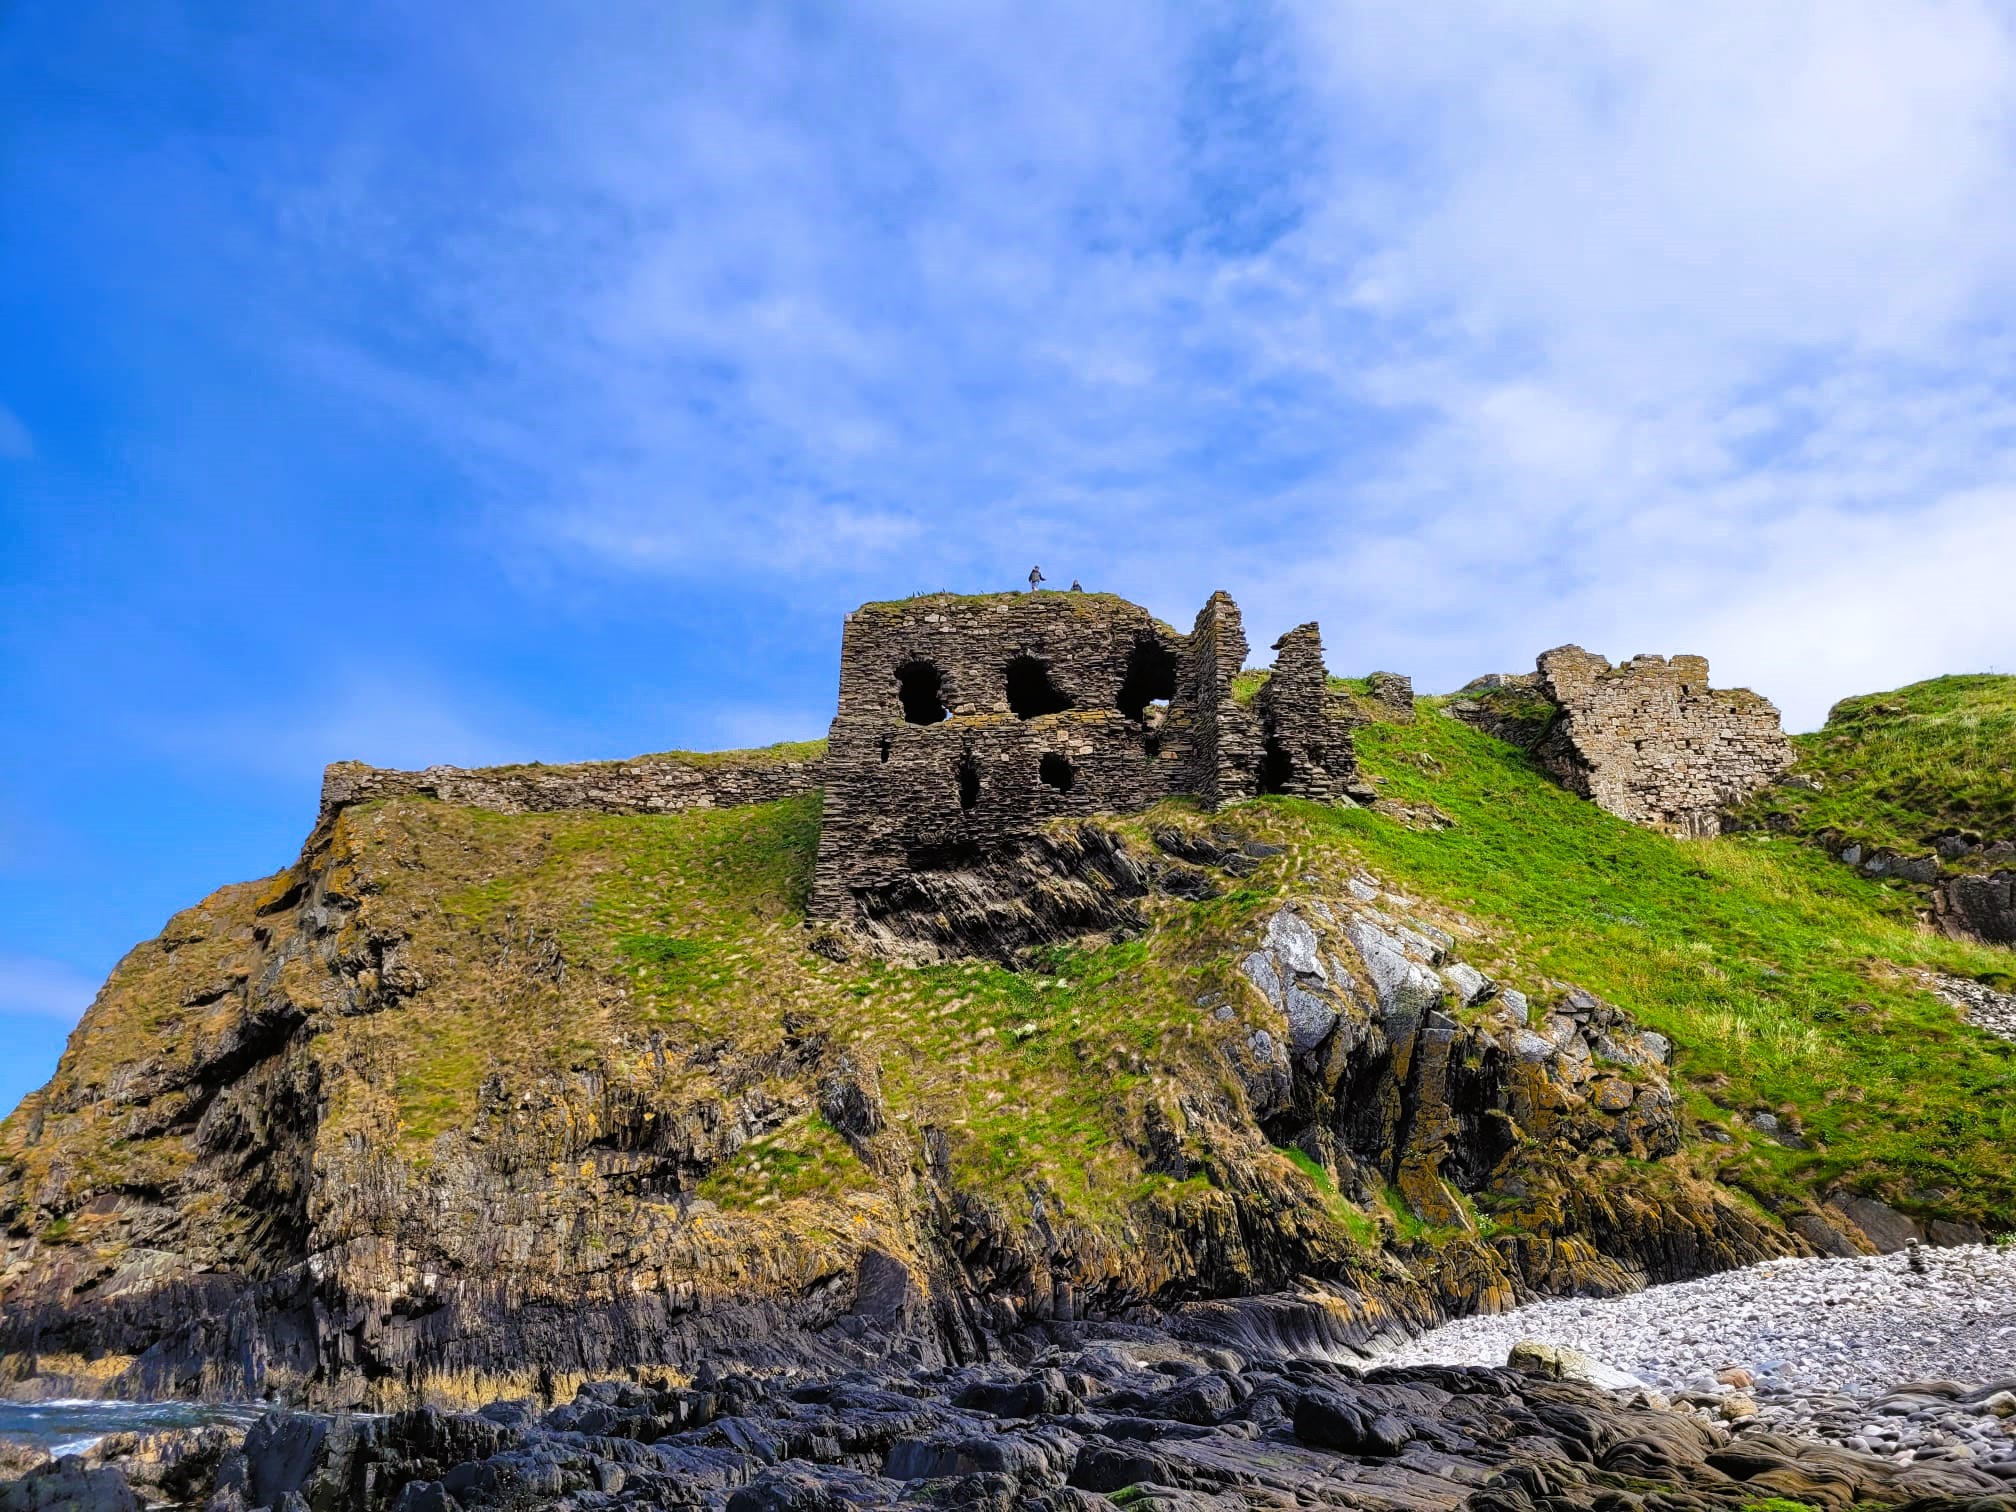 The stunning Findlater Castle at Cullen